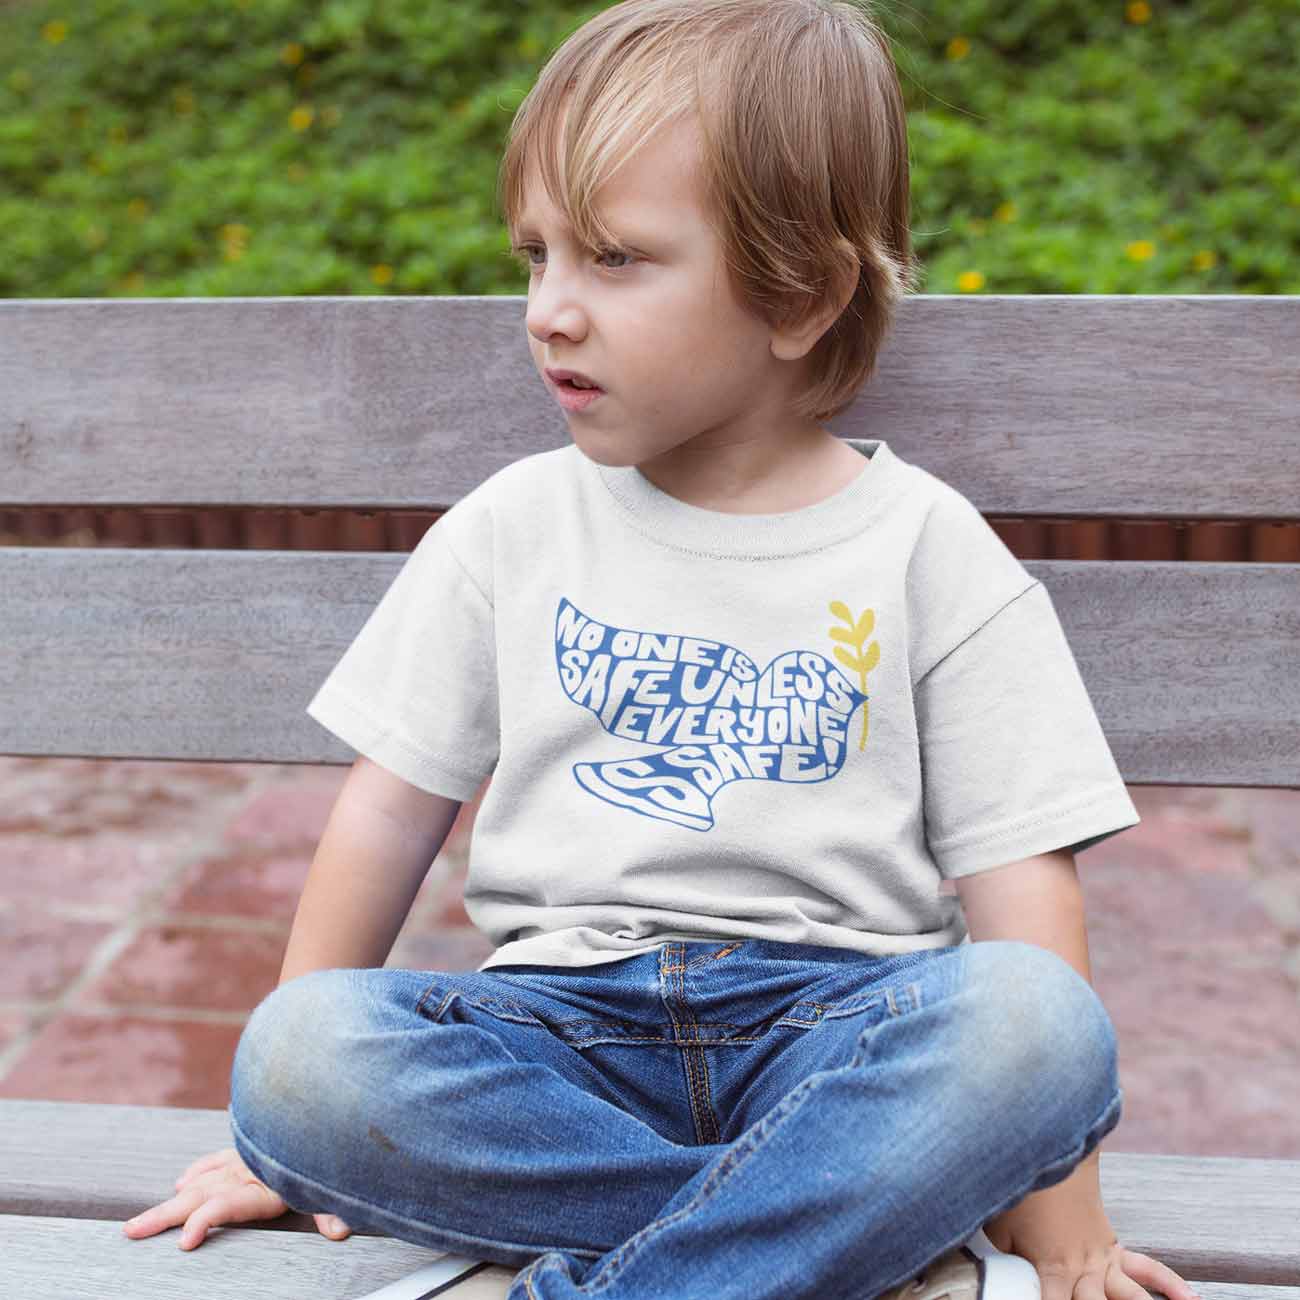 Image of child wearing the No One Is Safe Unless Everyone Is Safe tee.